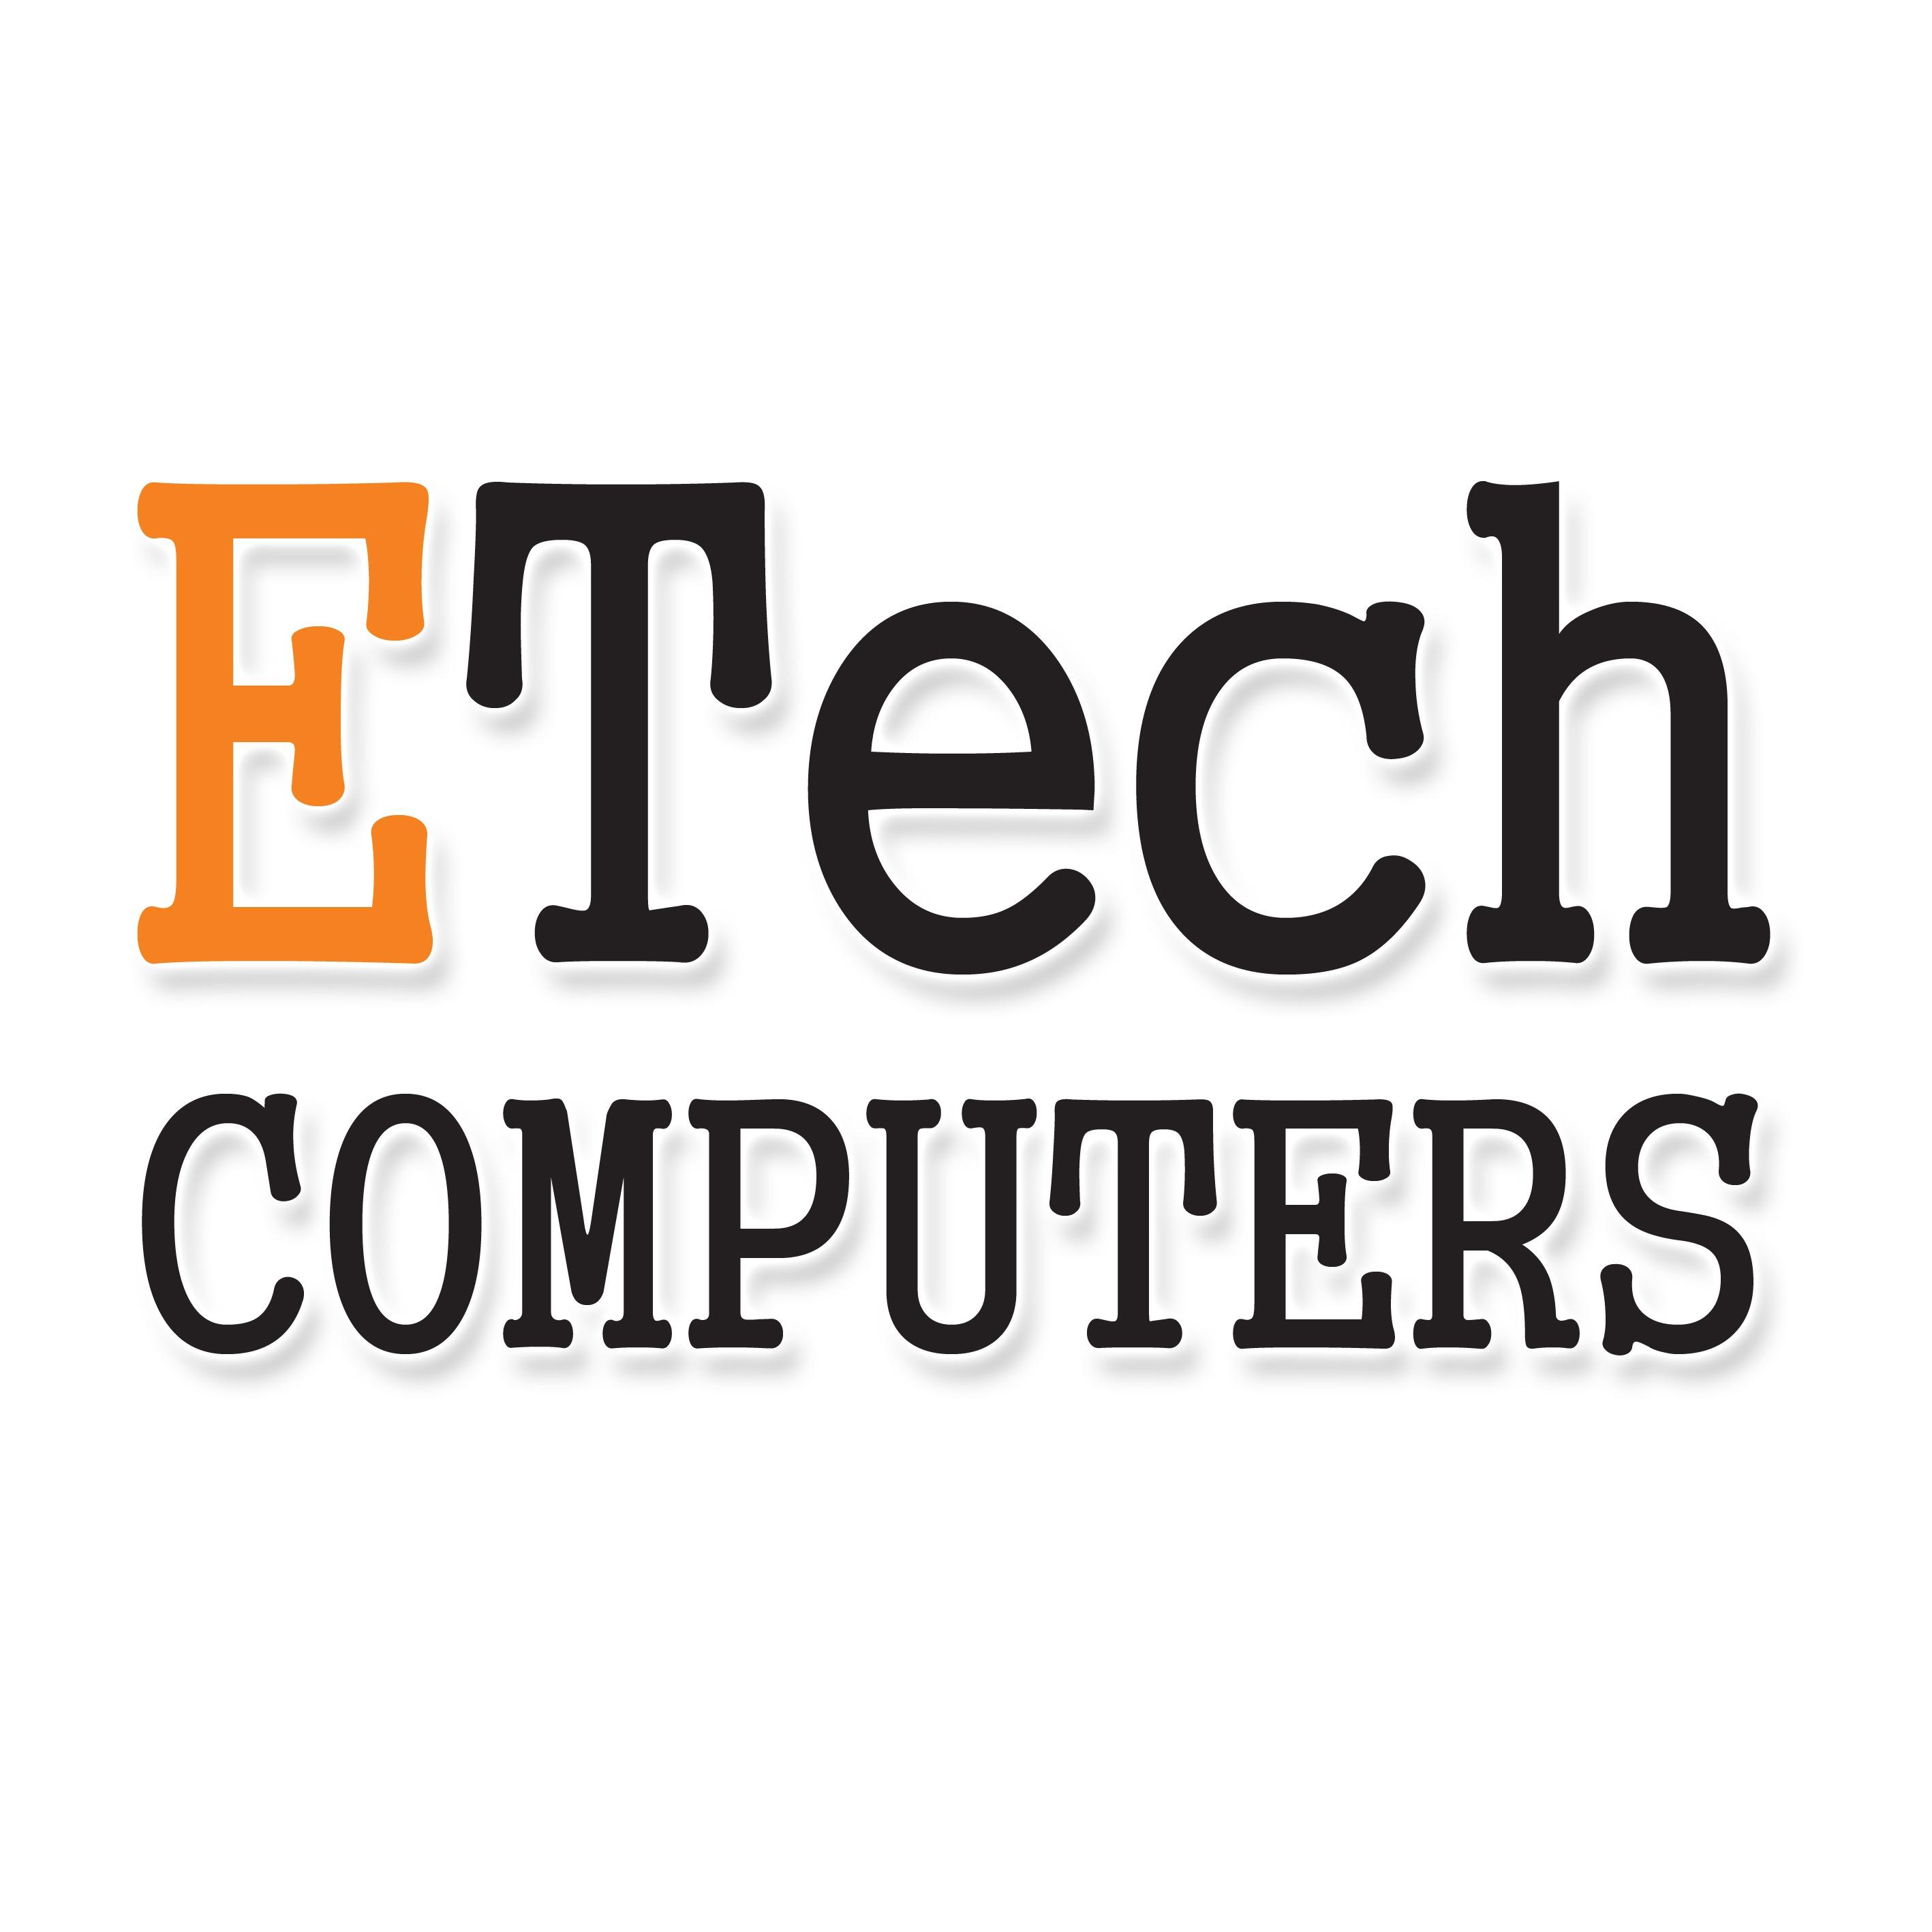 Etech Computers Holroyd